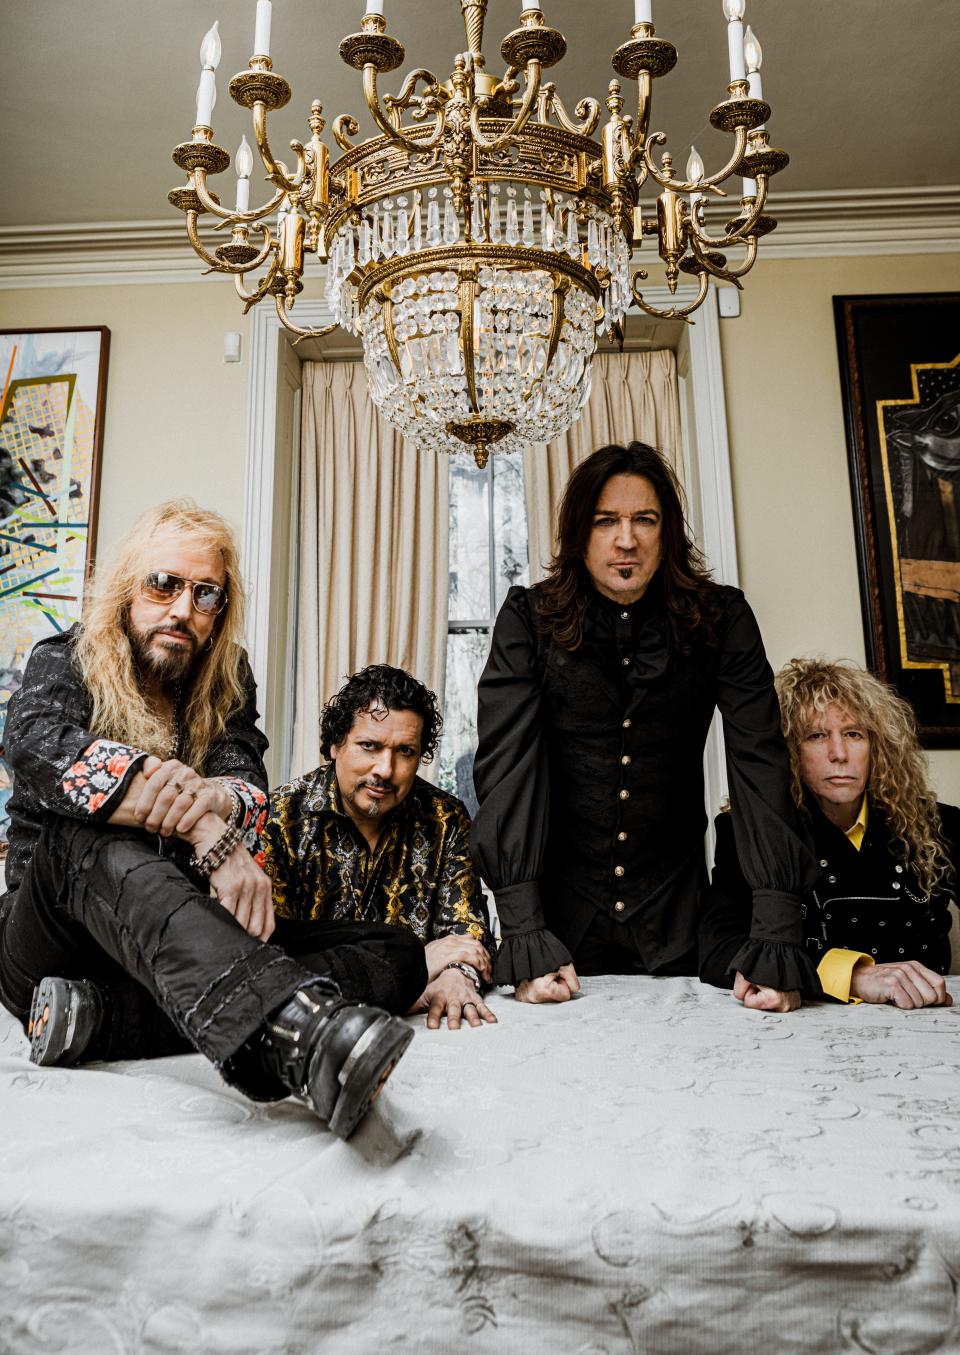 Stryper, a 1980s Christian-based pop metal band that achieved mainstream success, is among the acts featured at this week's Alive Music Festival at Atwood Lake Park.